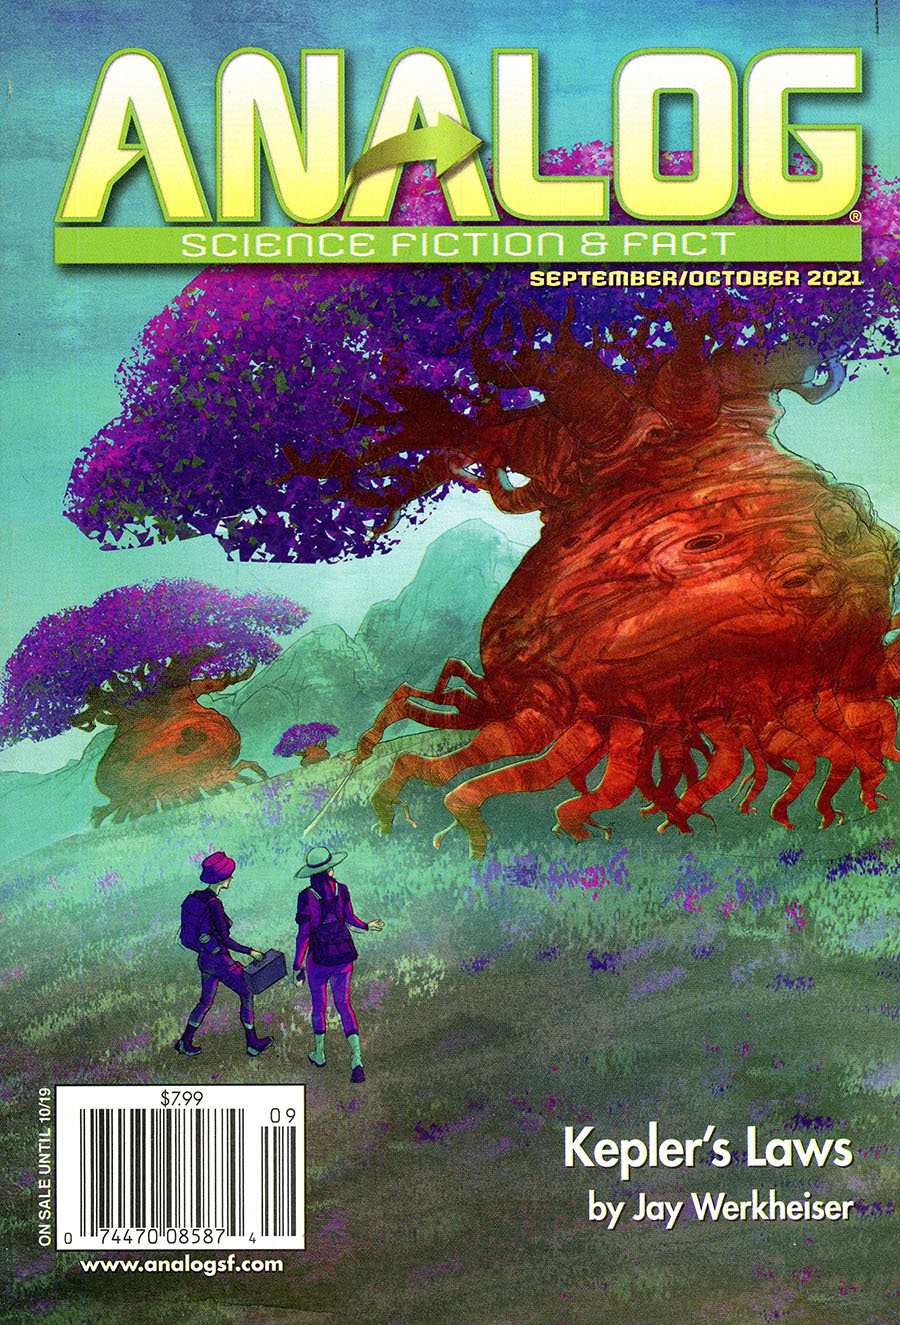 Analog Science Fiction And Fact Vol 141 #09 & #10 September / October 2021